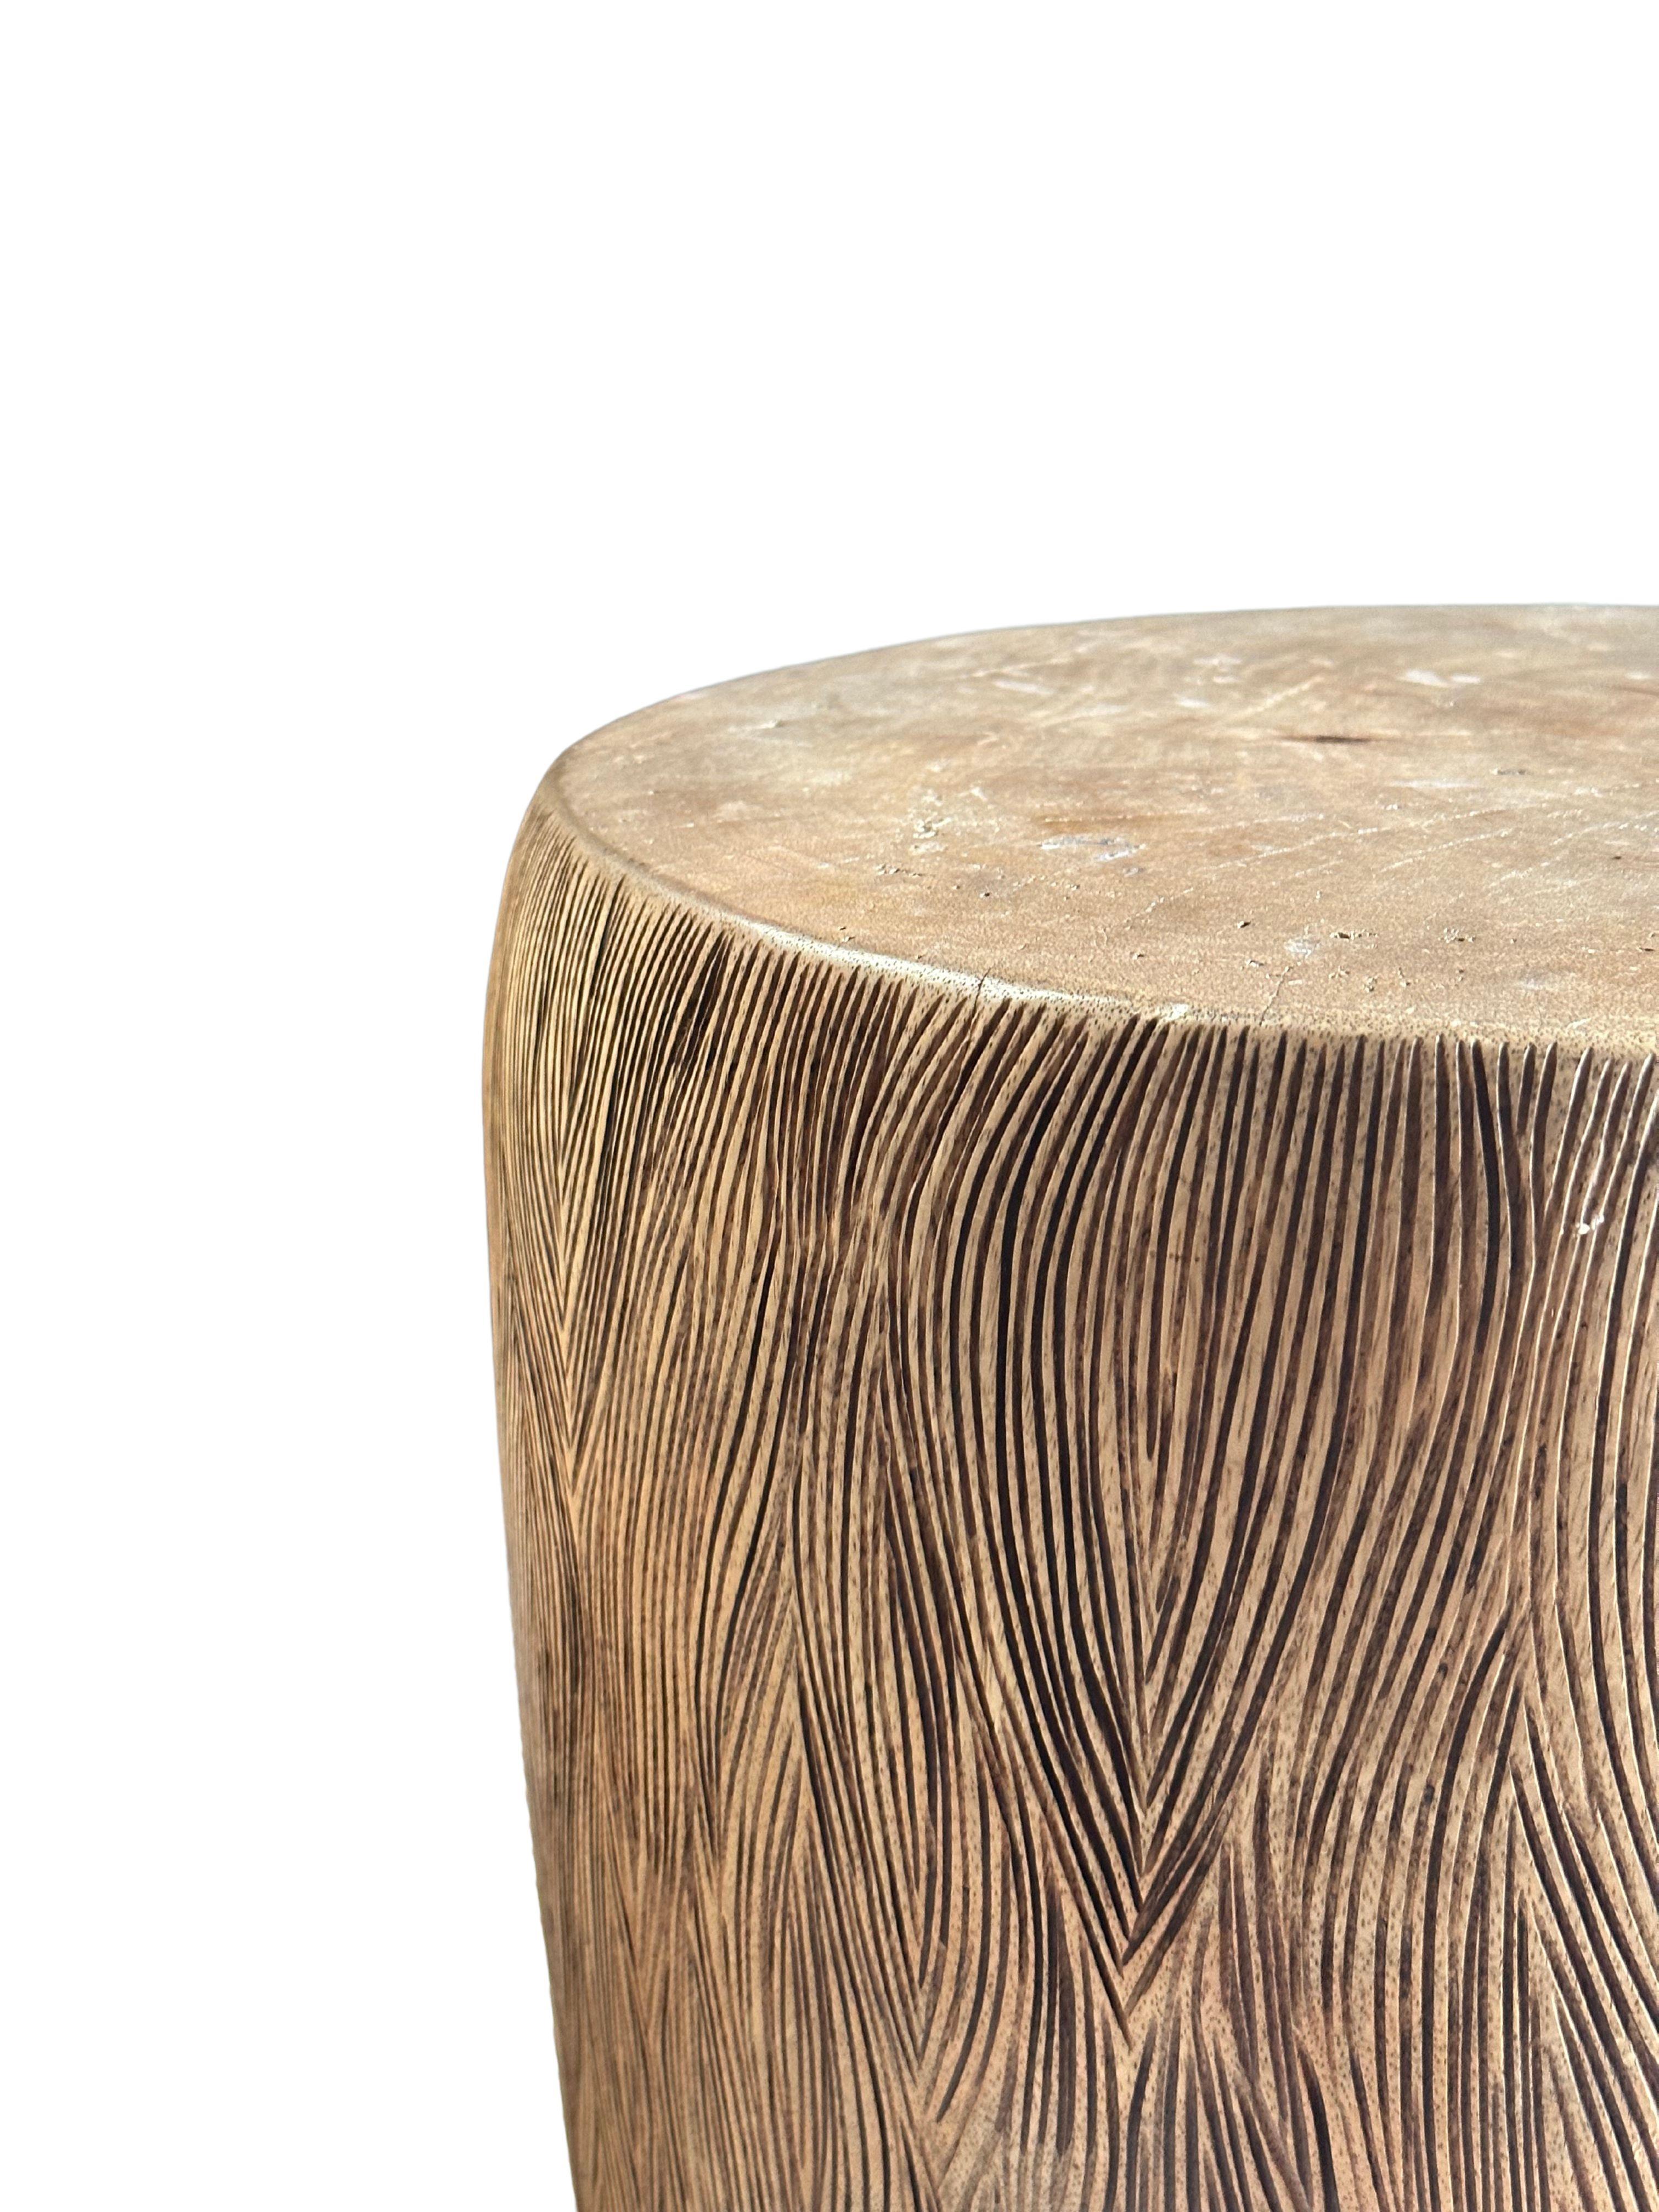 A wonderfully sculptural side table crafted from solid mango wood. It features a natural finish where the exterior was sanded and smoothed. The table features a wonderful mix of wood textures and shades. The perfect object to bring warmth to any